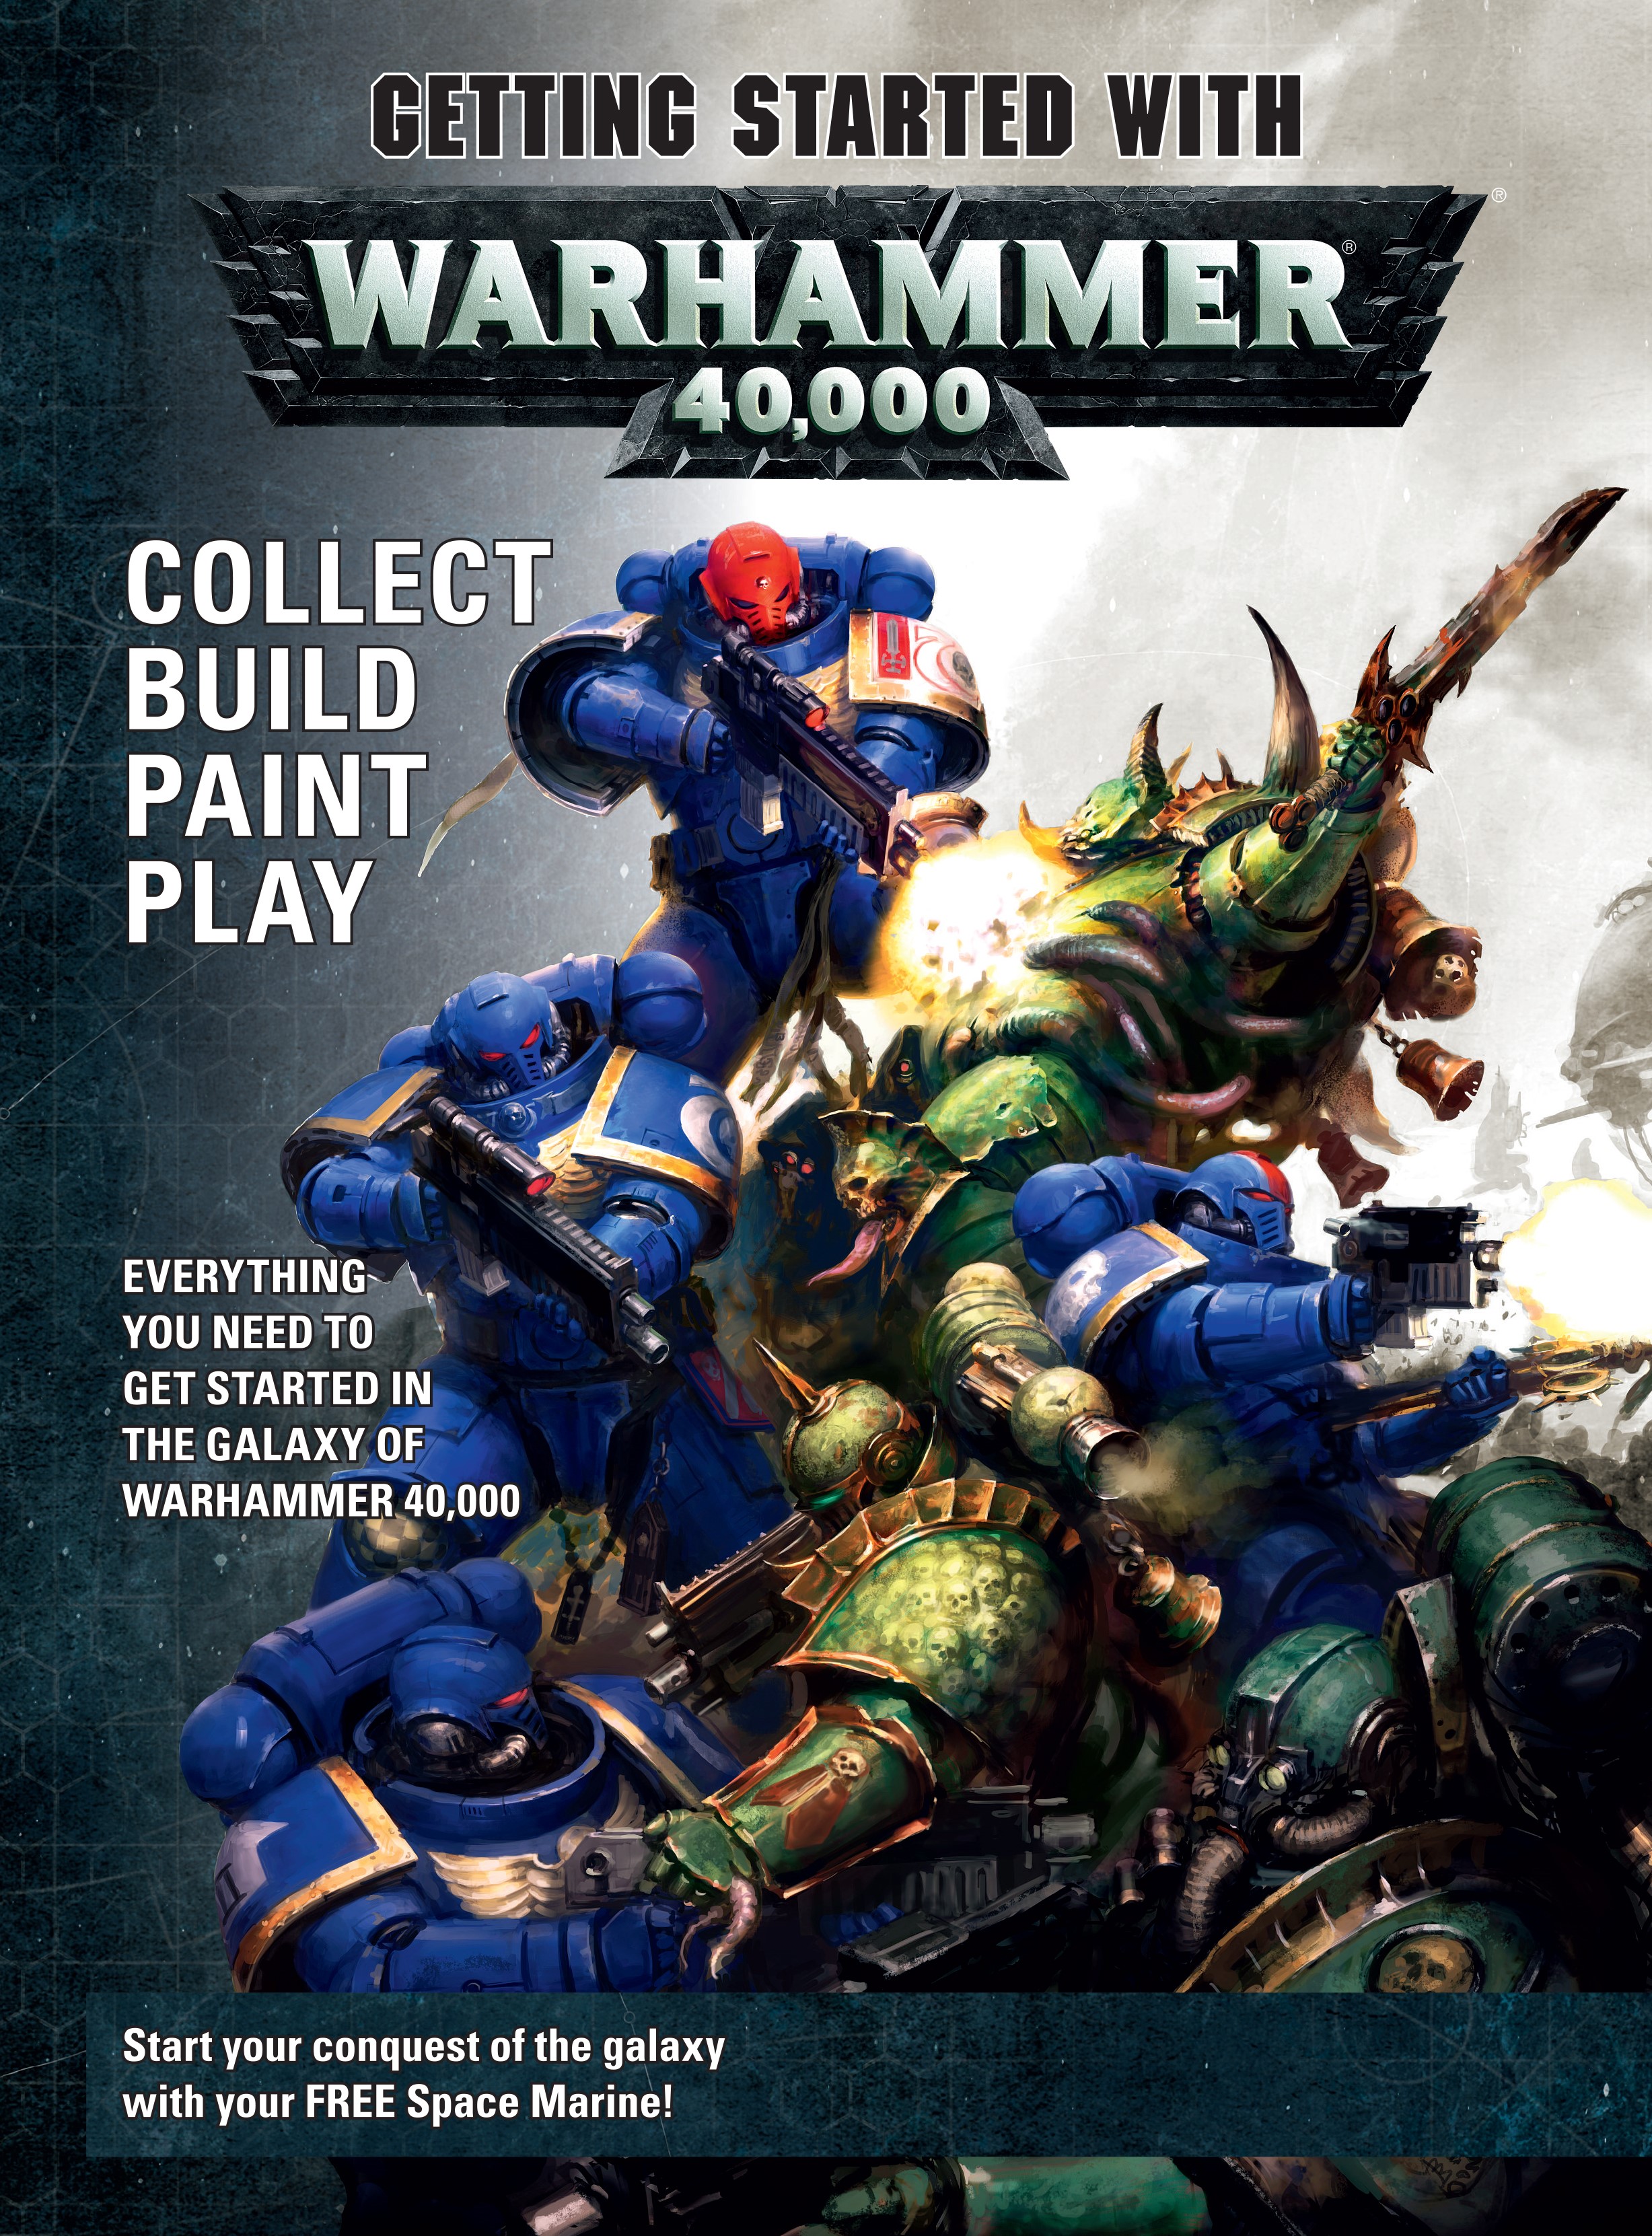 Getting started with WARHAMMER 40,000